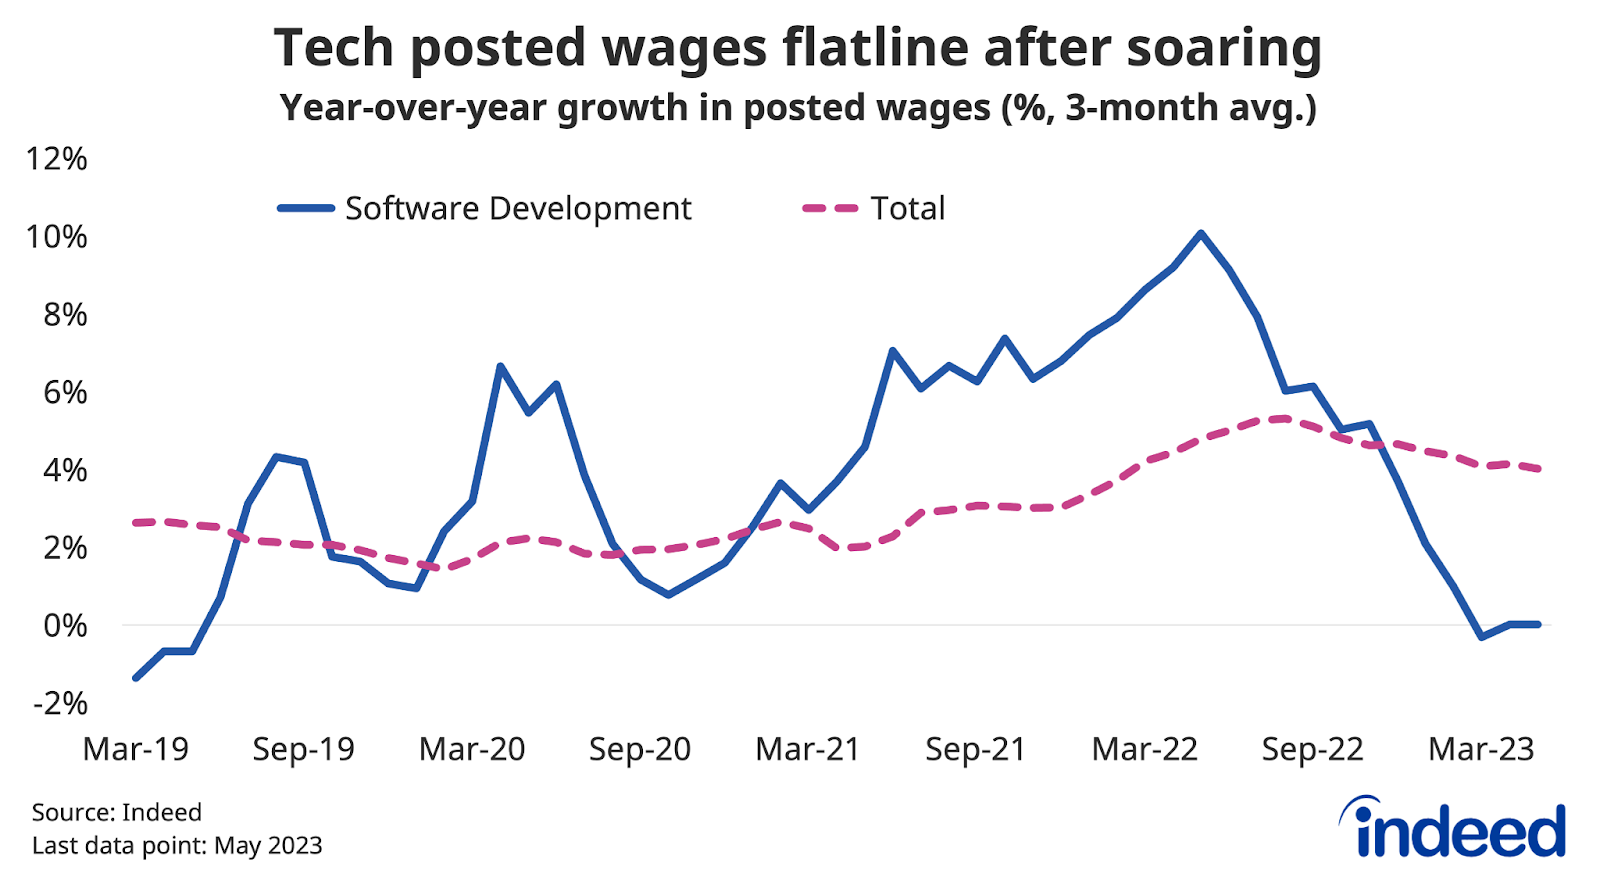 Line chart titled “Tech posted wages flatline after soaring” shows the 3-month average of year-over-year growth of posted wages on Indeed for software development postings, as well as the overall economy, between March 2019 and May 2023. Posted wages for software development positions were growing much faster than the rest of the economy in 2021 and 2022, but have dropped off to zero since. 